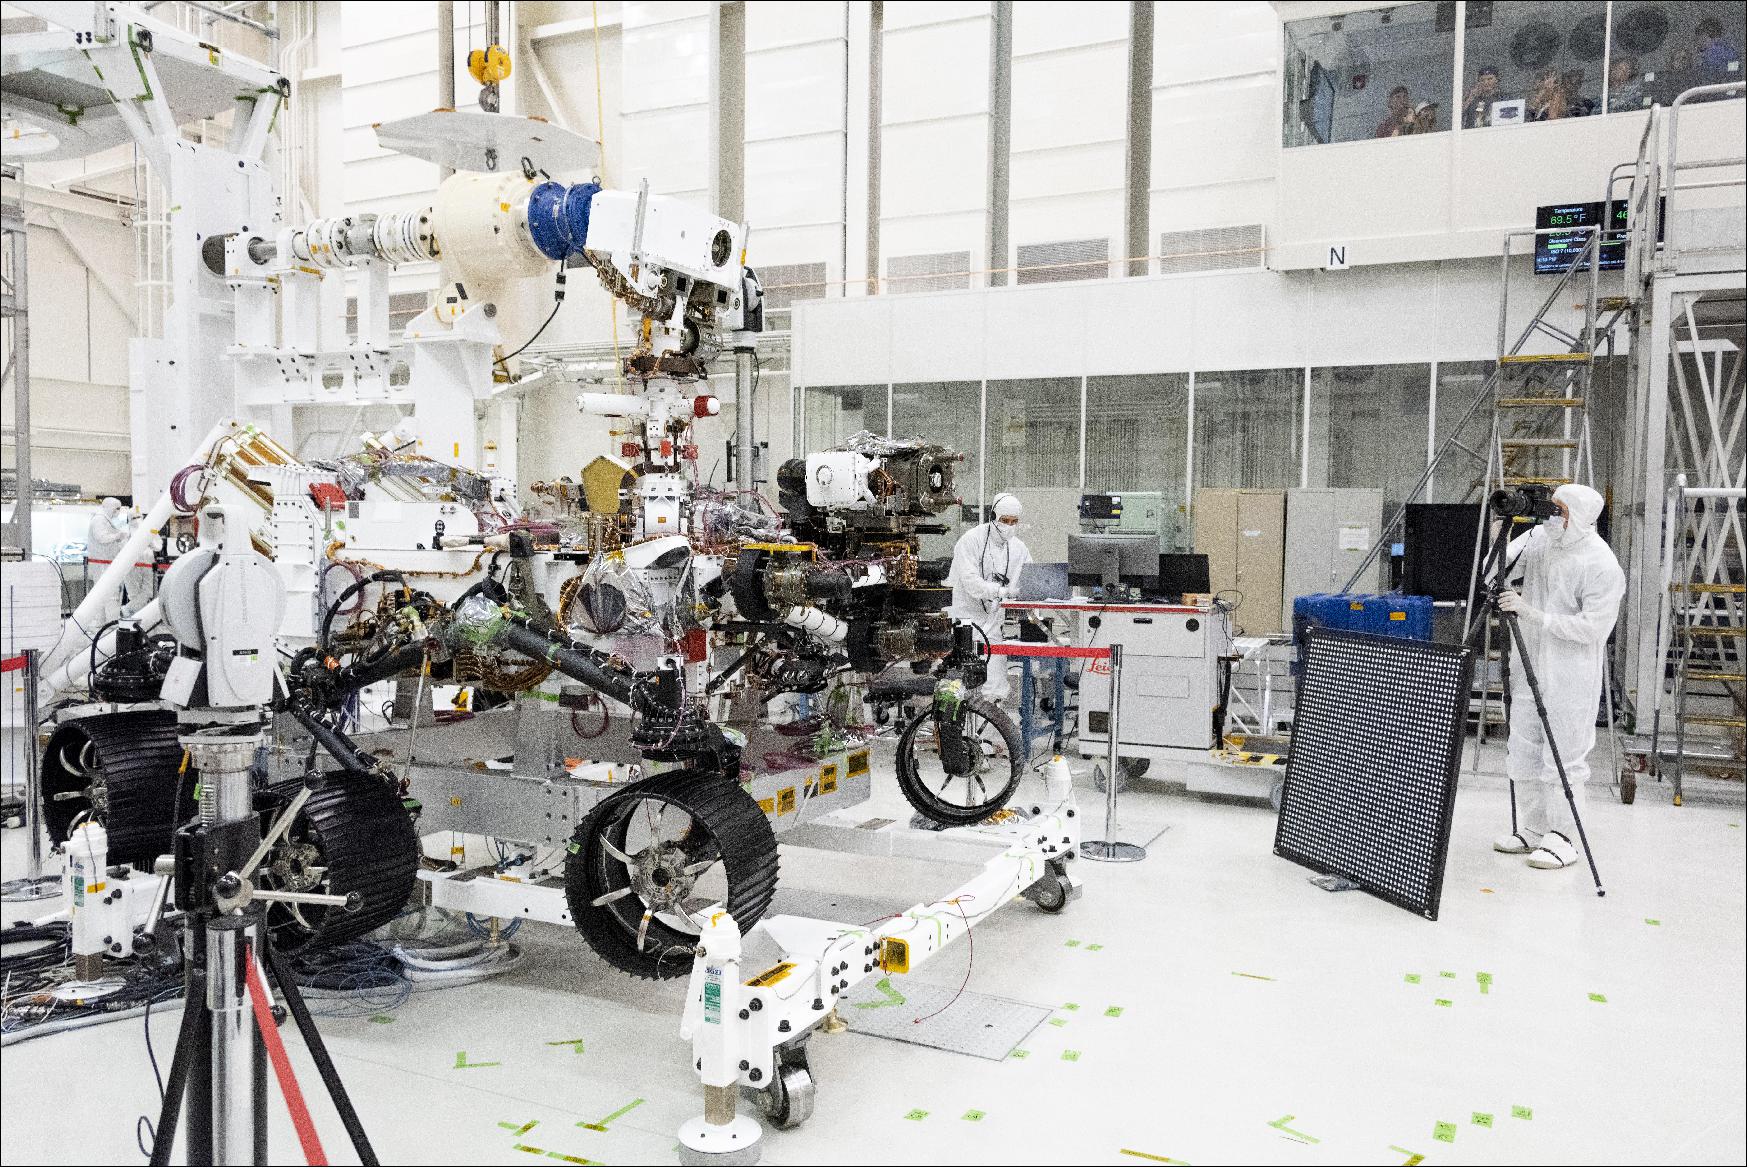 Figure 1: In this image, engineers test cameras on the top of the Mars 2020 rover's mast and front chassis. The image was taken on July 23, 2019, in the Spacecraft Assembly Facility's High Bay 1 at NASA's Jet Propulsion Laboratory in Pasadena, California (image credit: NASA/JPL-Caltech)